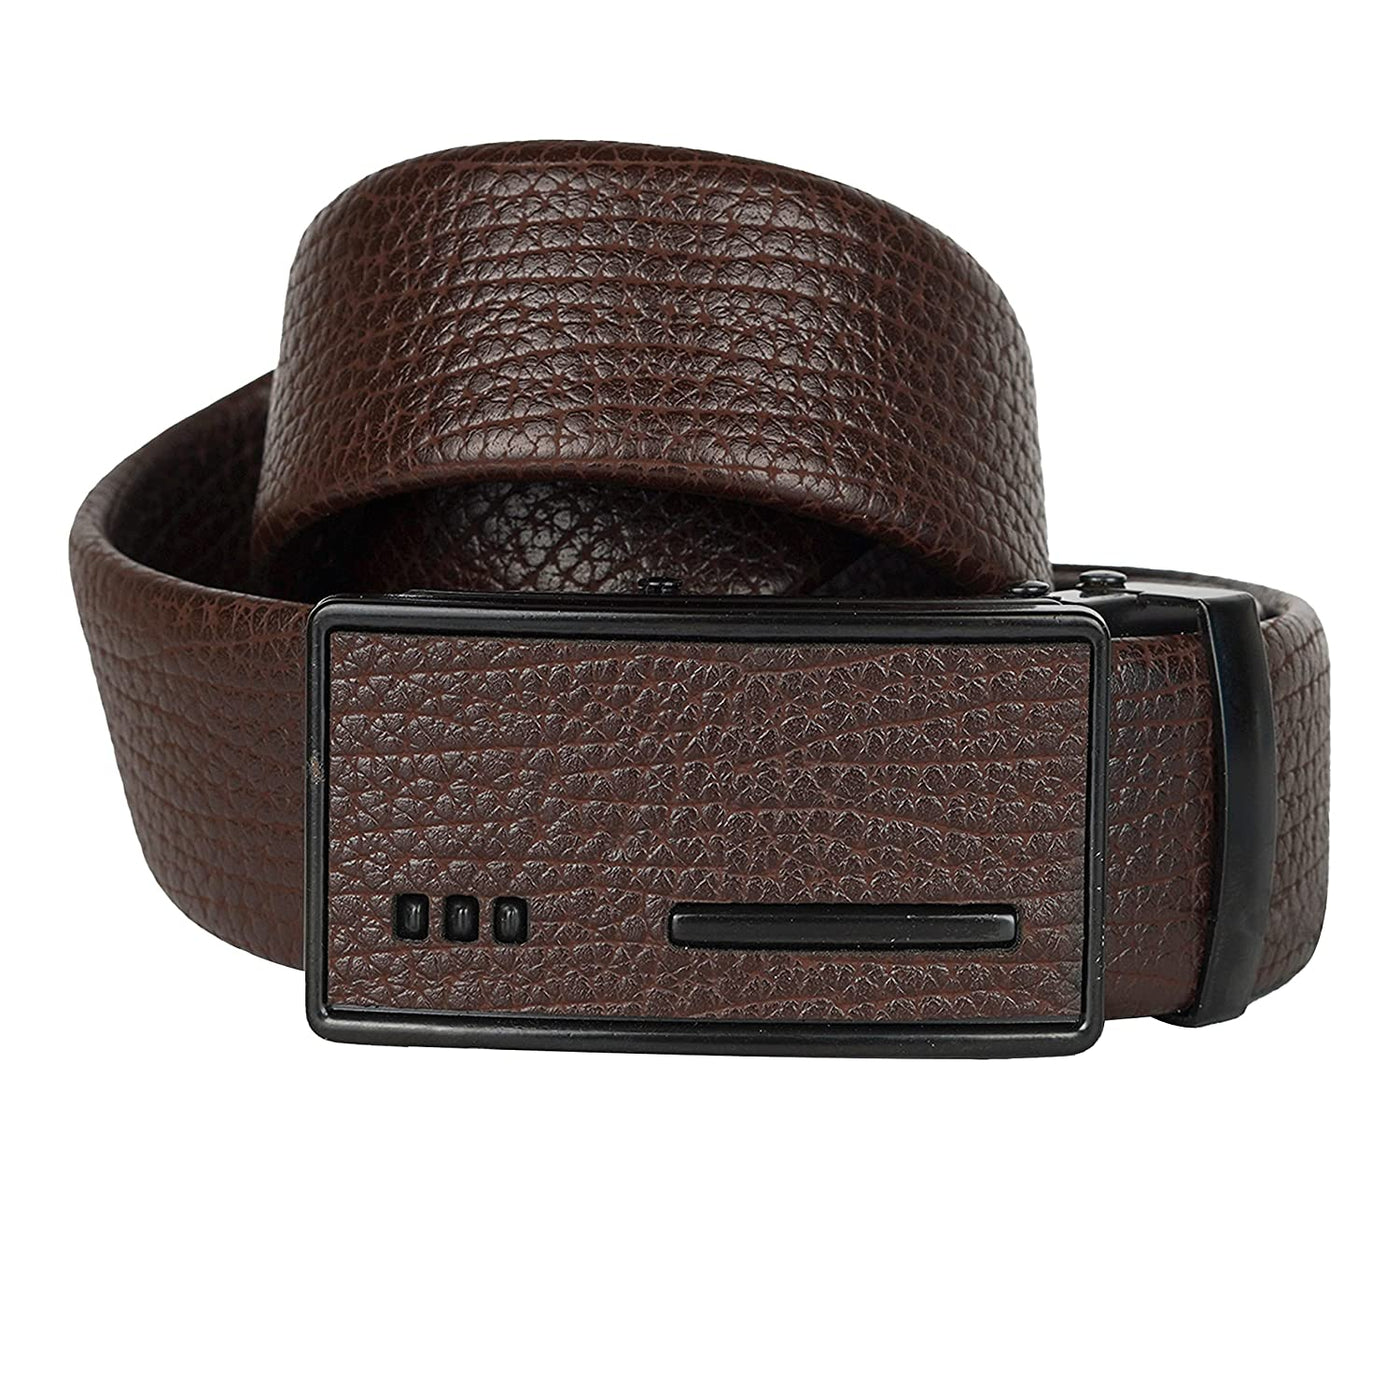 Auto Lock Buckle PU Leather Belt For Men Formal Casual Jeans Pants (GB16-AUP-B-Brown)